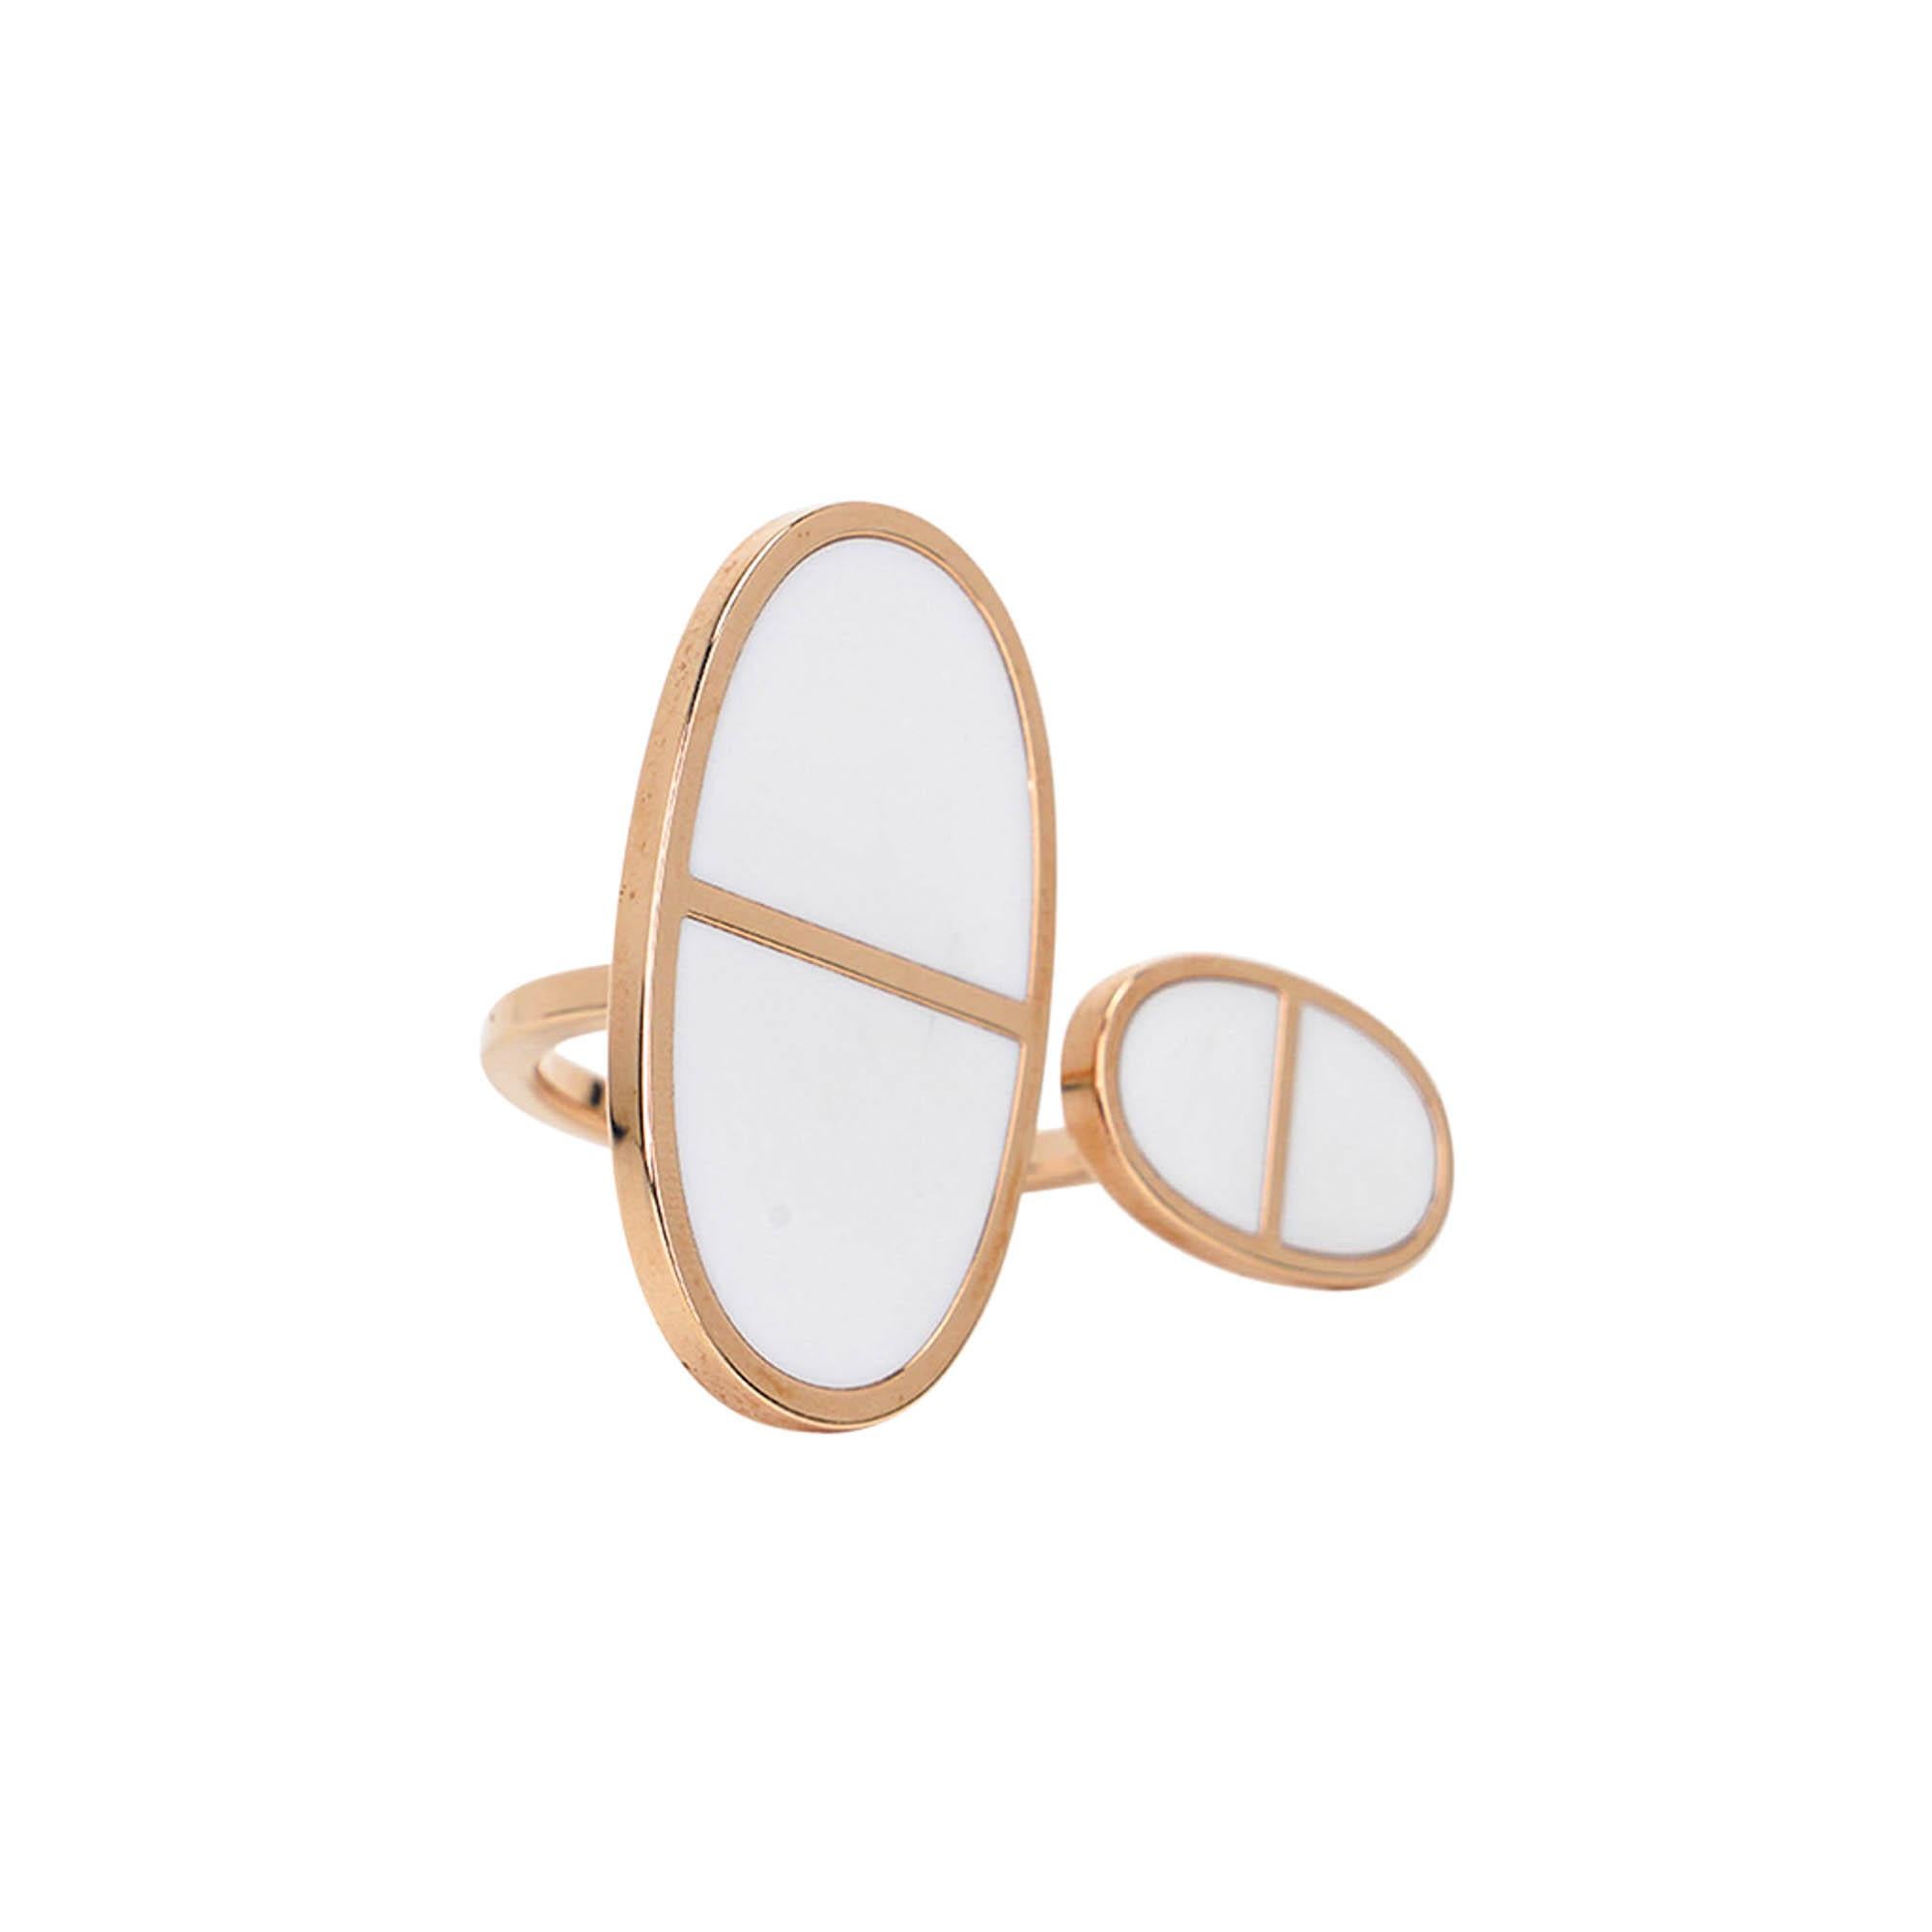 Mightychic offers a limited edition Hermes Chaine d'Ancre Verso ring featured in 18K Rose Gold
and White ceramic.
The classic Hermes link is presented as an in between the finger ring.
So fresh and young.
A beautiful and timeless piece.
New or